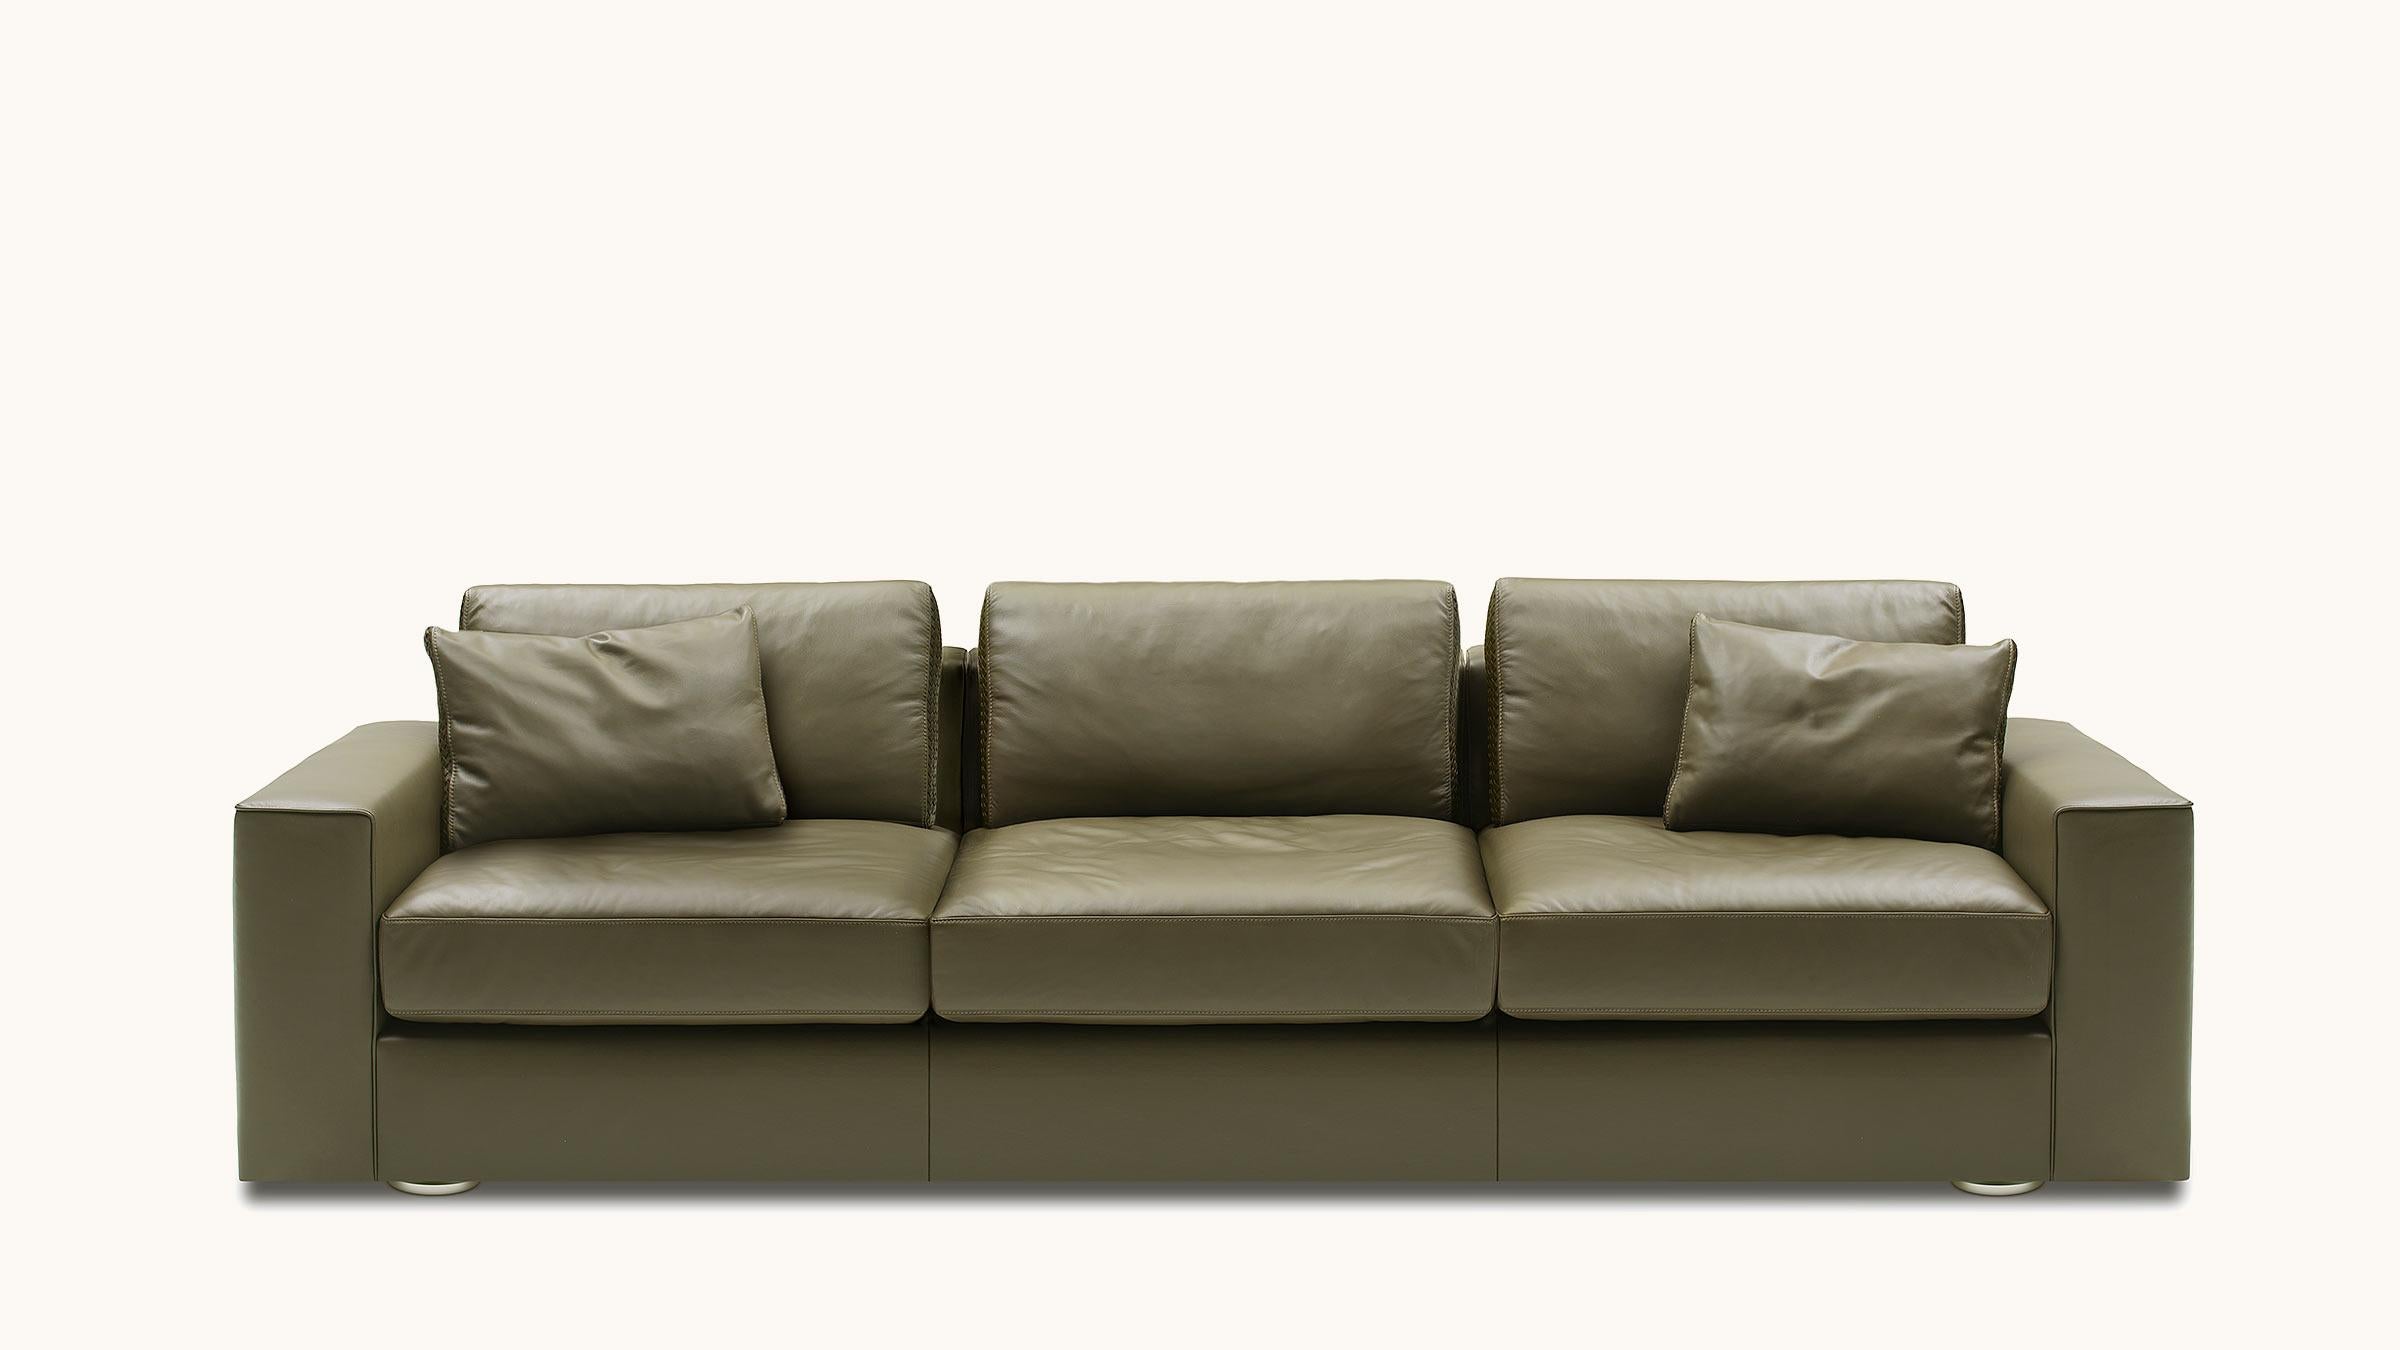 DS-247 is a new sofa system that can not only be adjusted to different positions, but also to your life – with all its facets. Do you want to relax, read or simply do nothing? Have a face-to-face conversation? Do you want to close your eyes for a